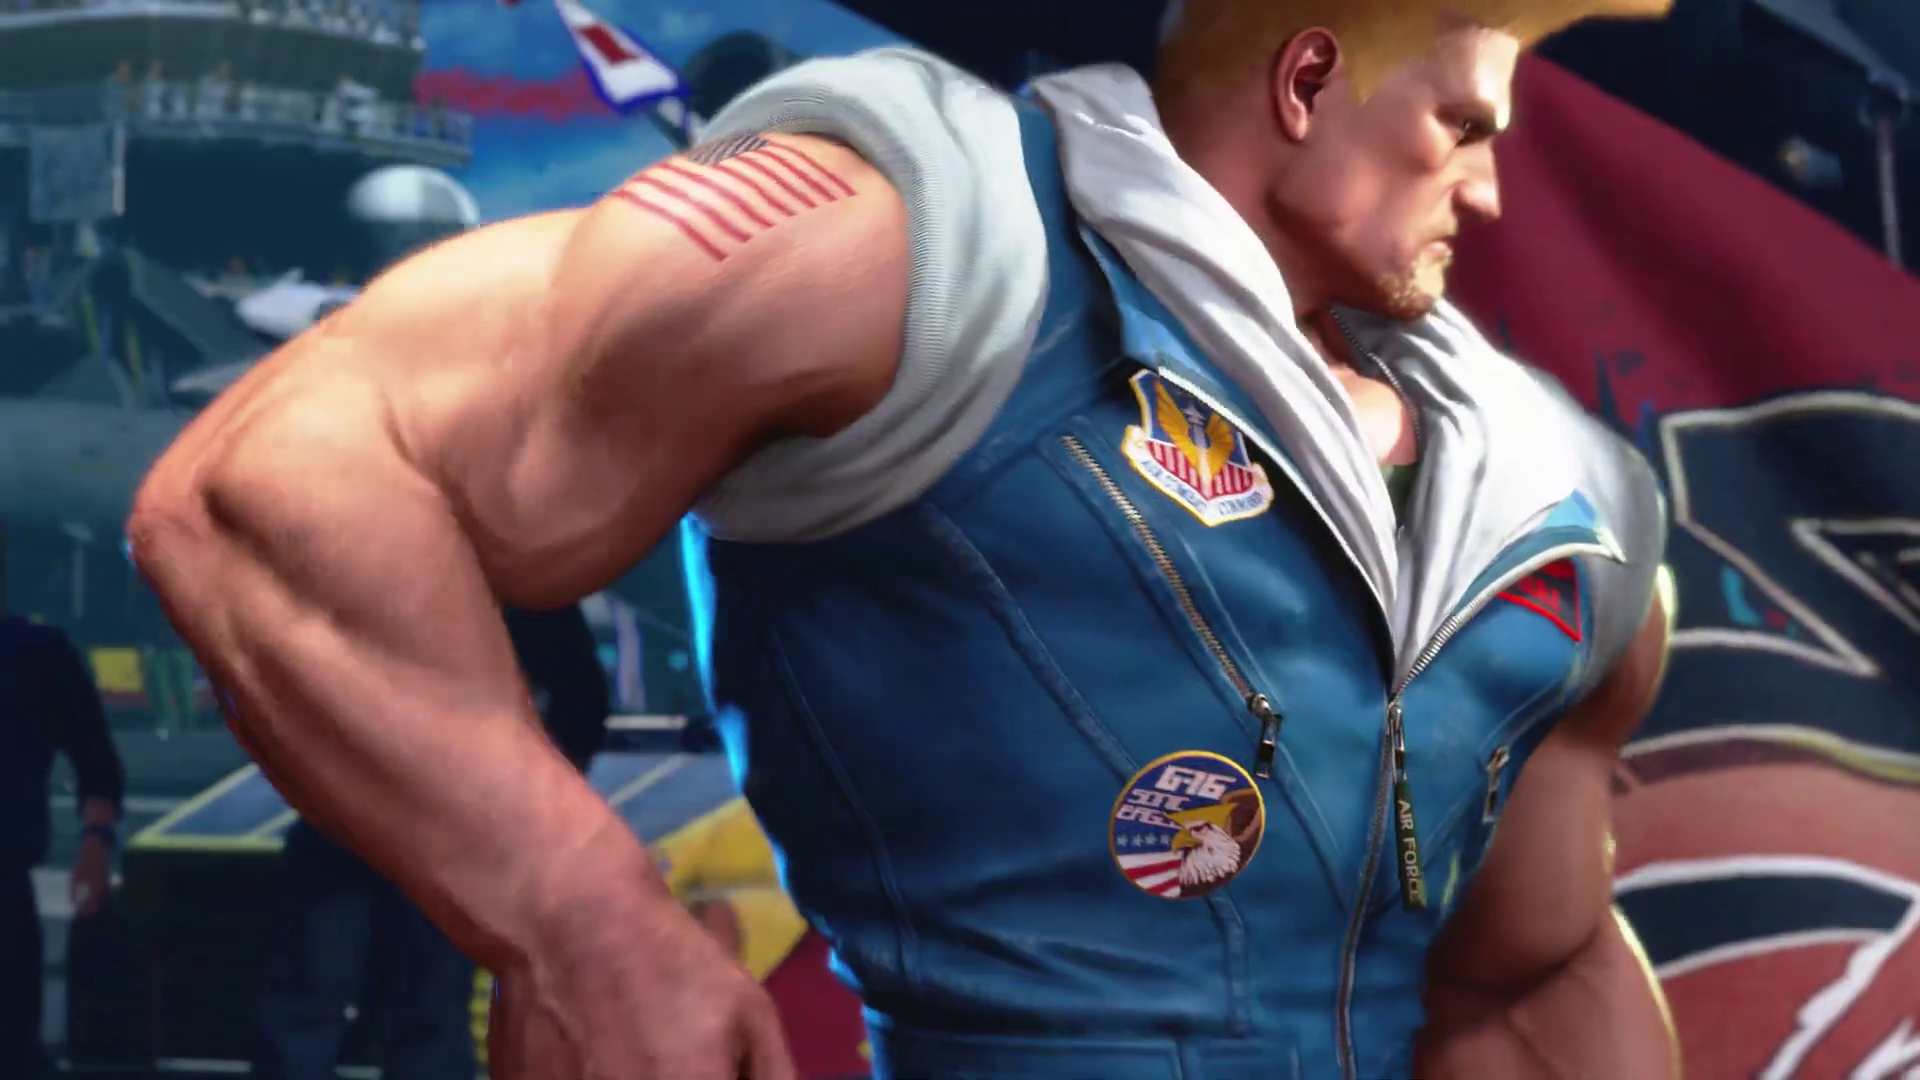 Guile Announced For Street Fighter 6 - Cinelinx